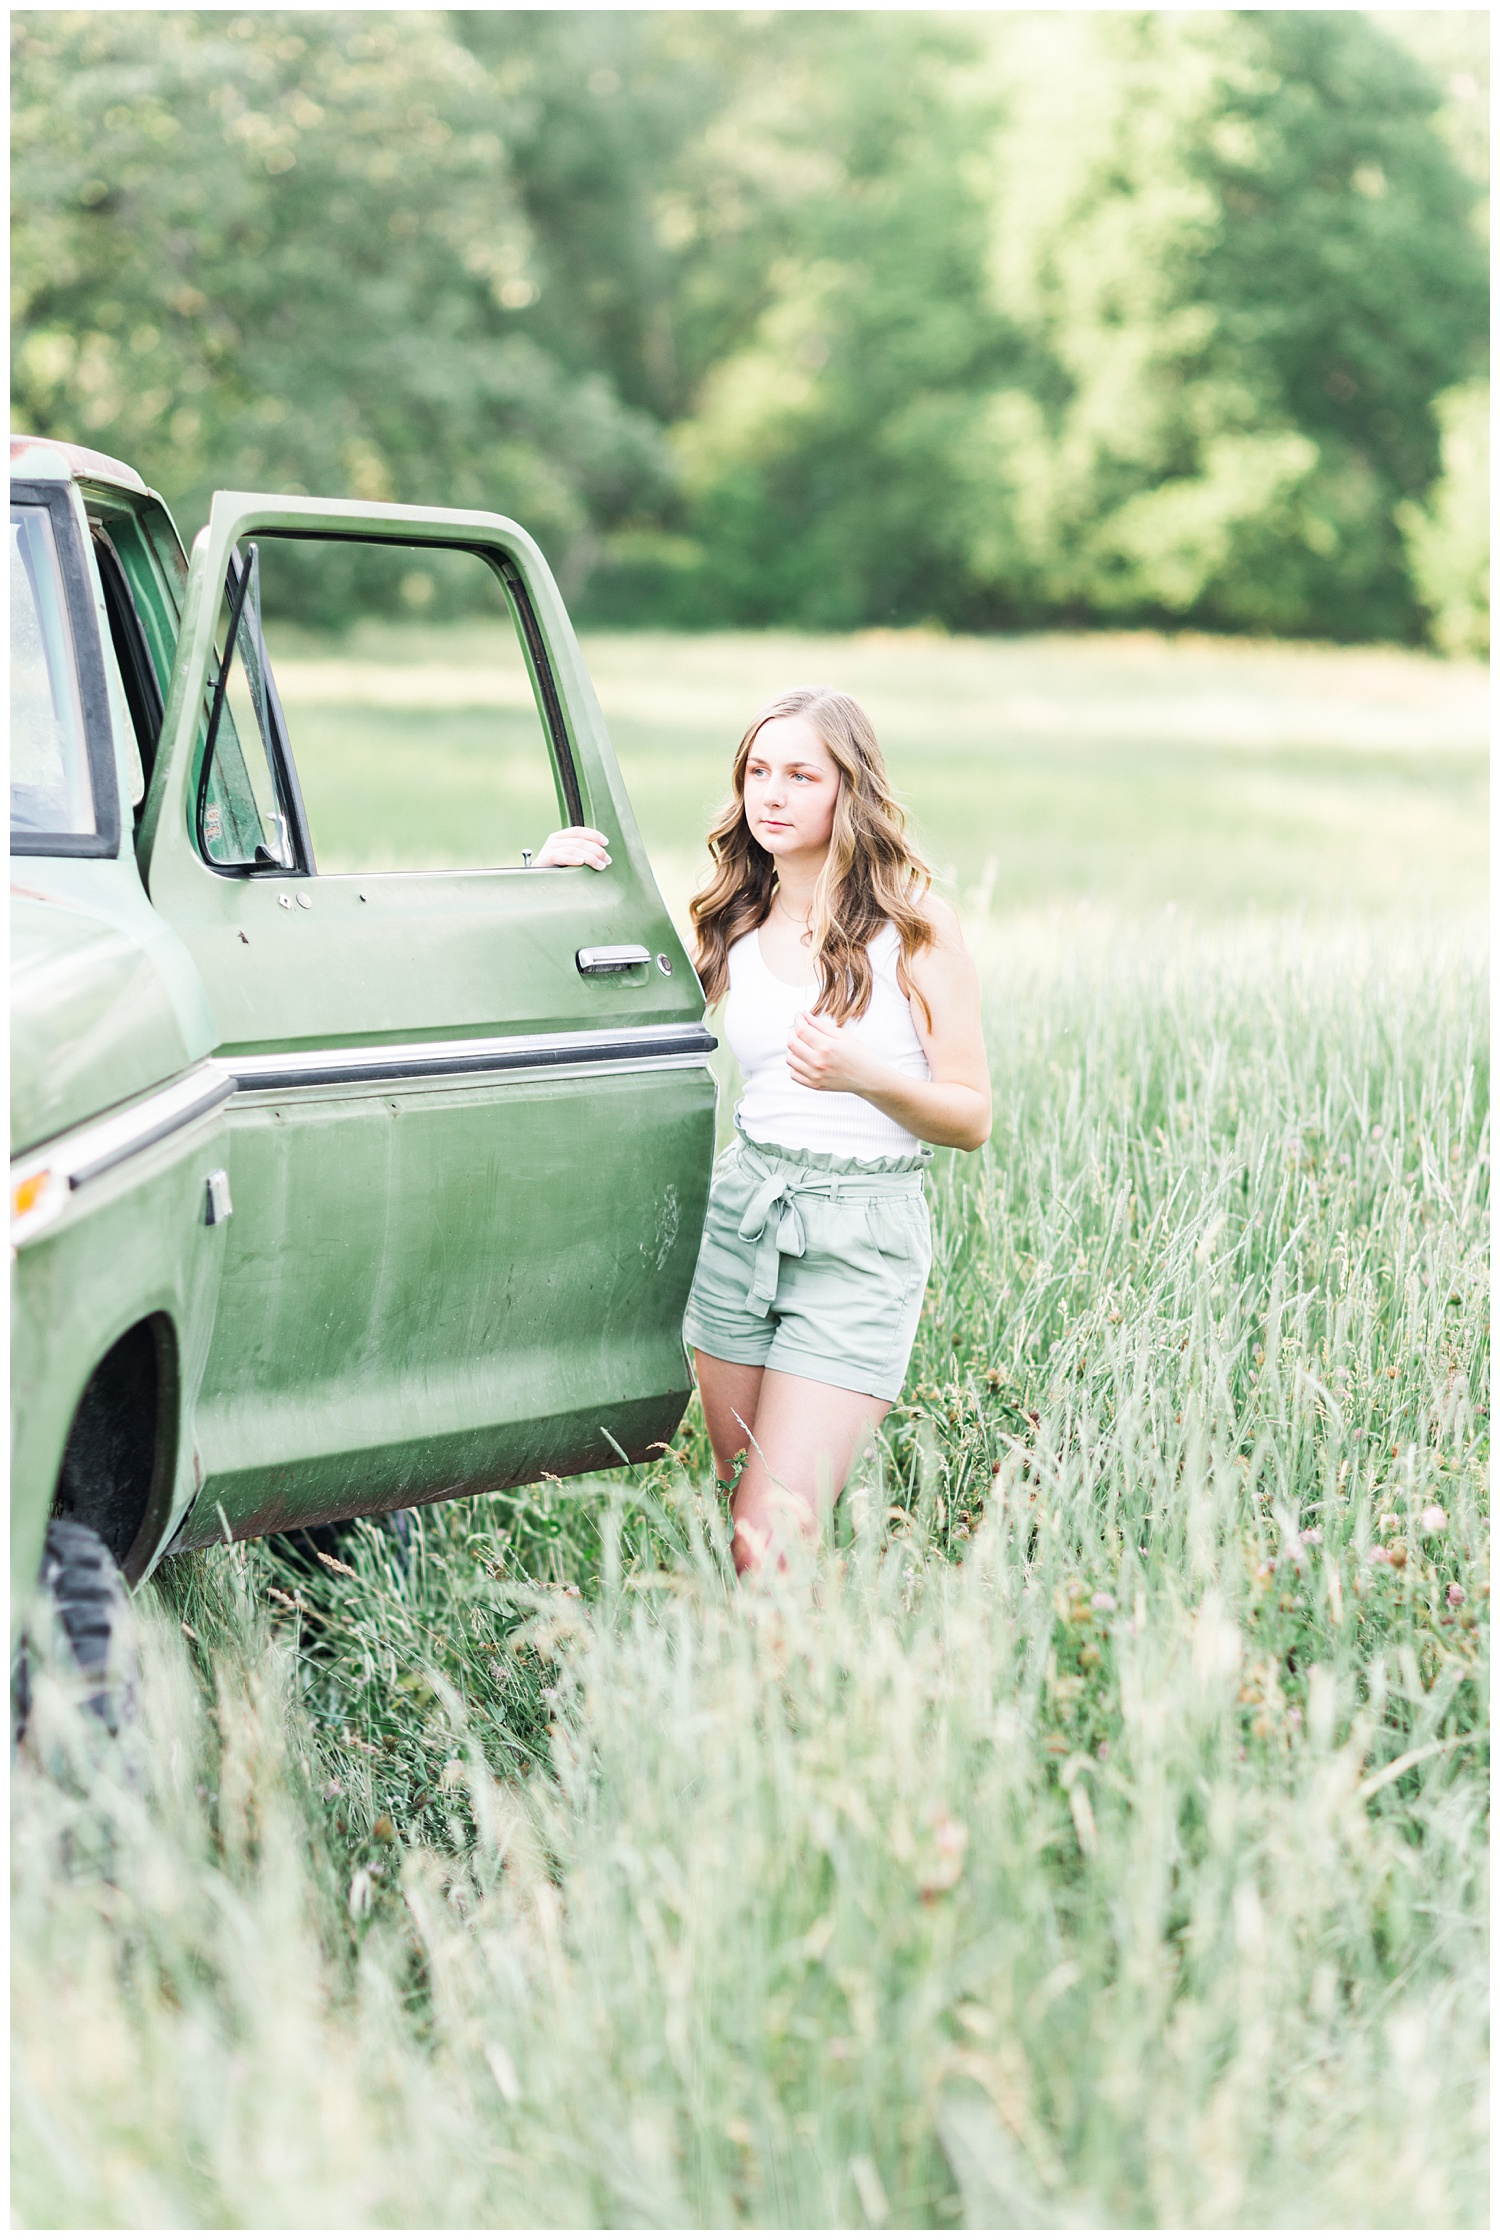 Senior Taylor standing next to an old green Ford truck in a grassy field | CB Studio